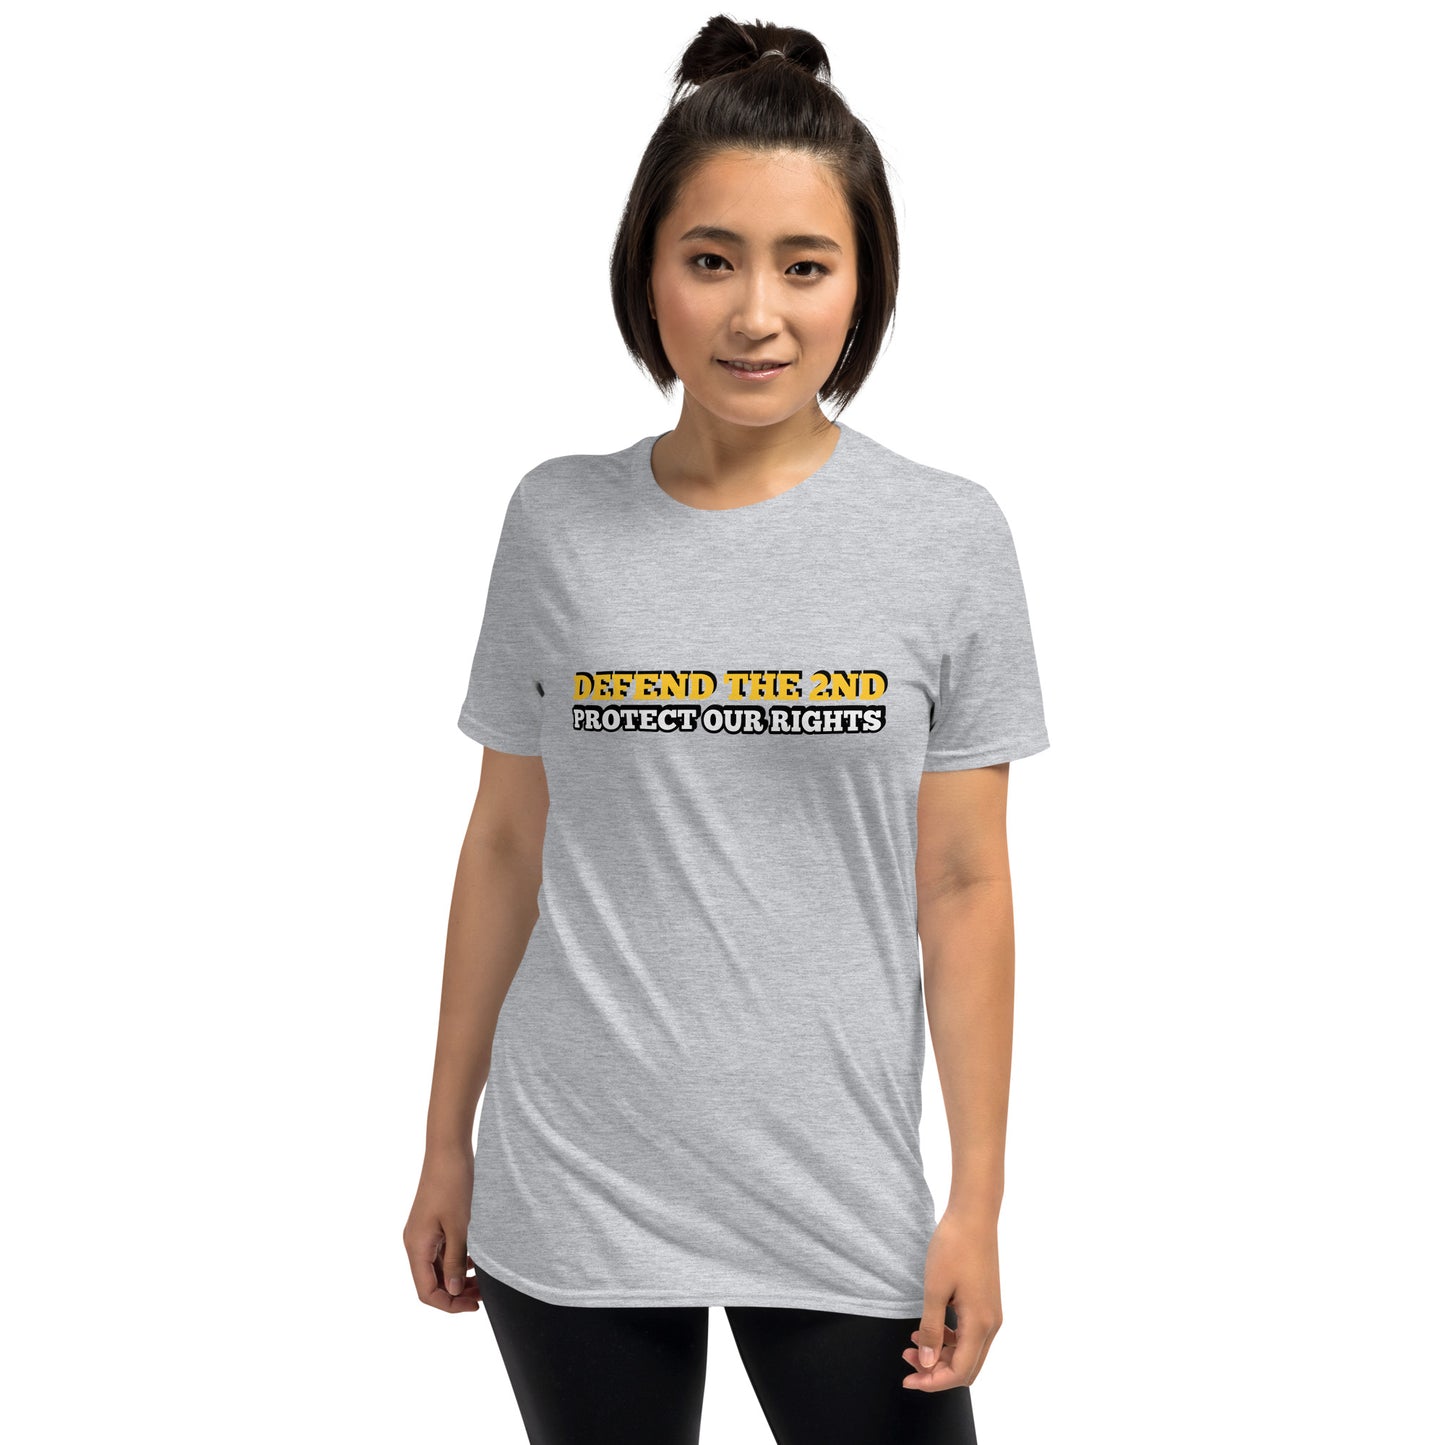 Stand Up for Your Rights with Our Defend the 2nd Amendment Unisex Shirt